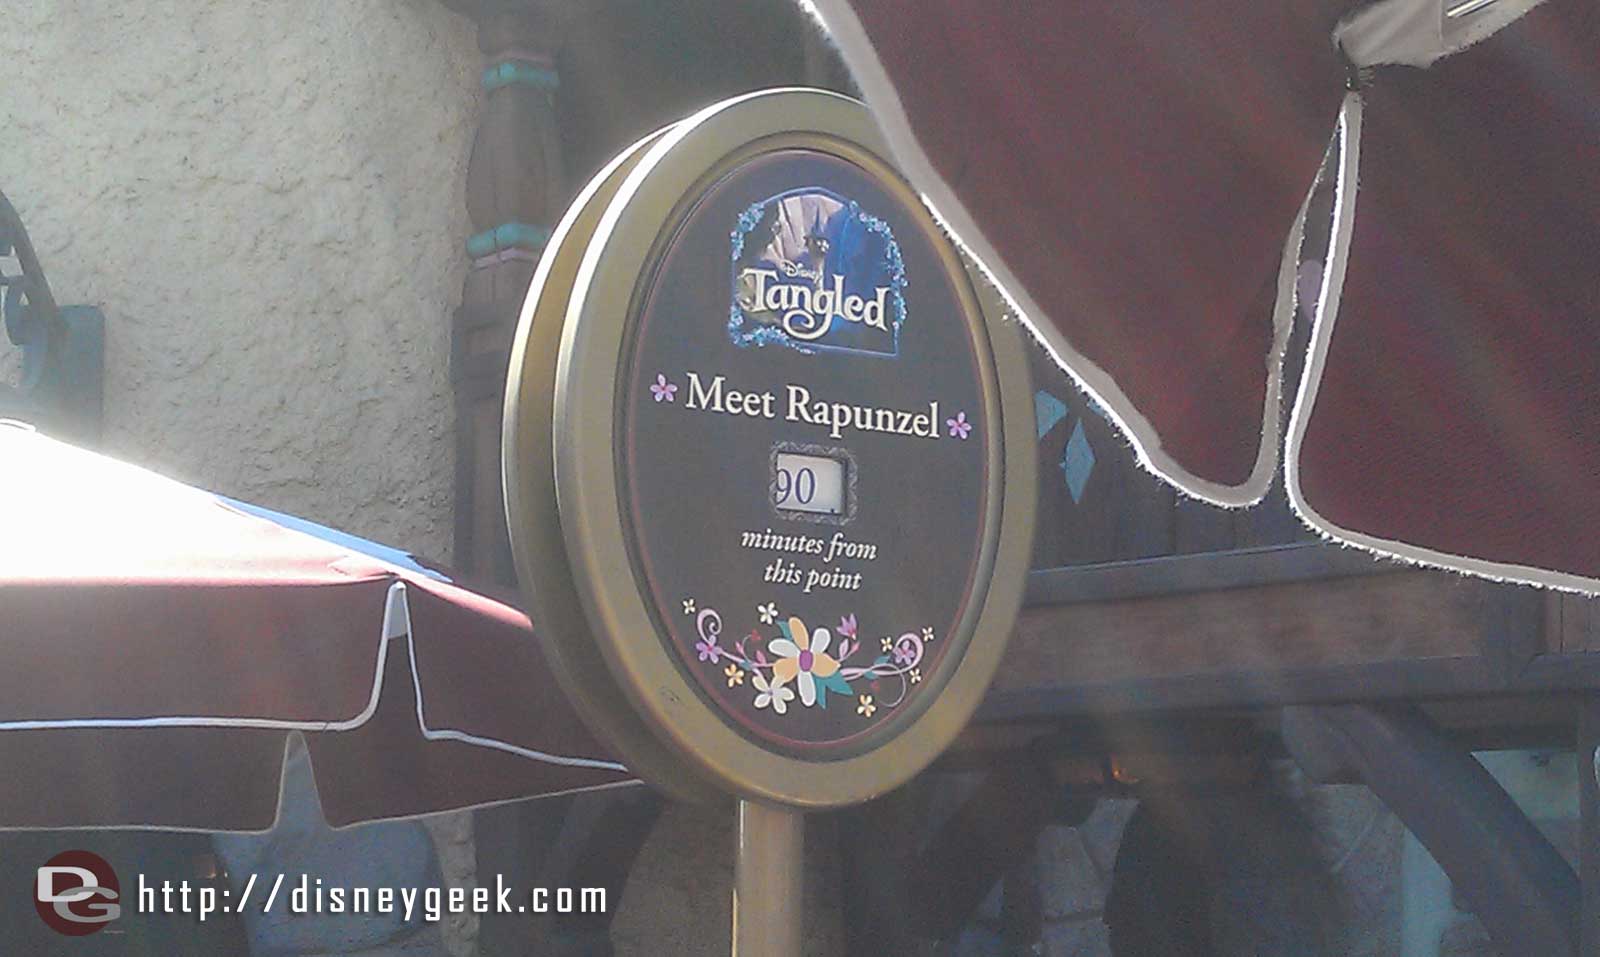 Fantasy Faire has not shortened the Rapunzel wait posted at 90 min